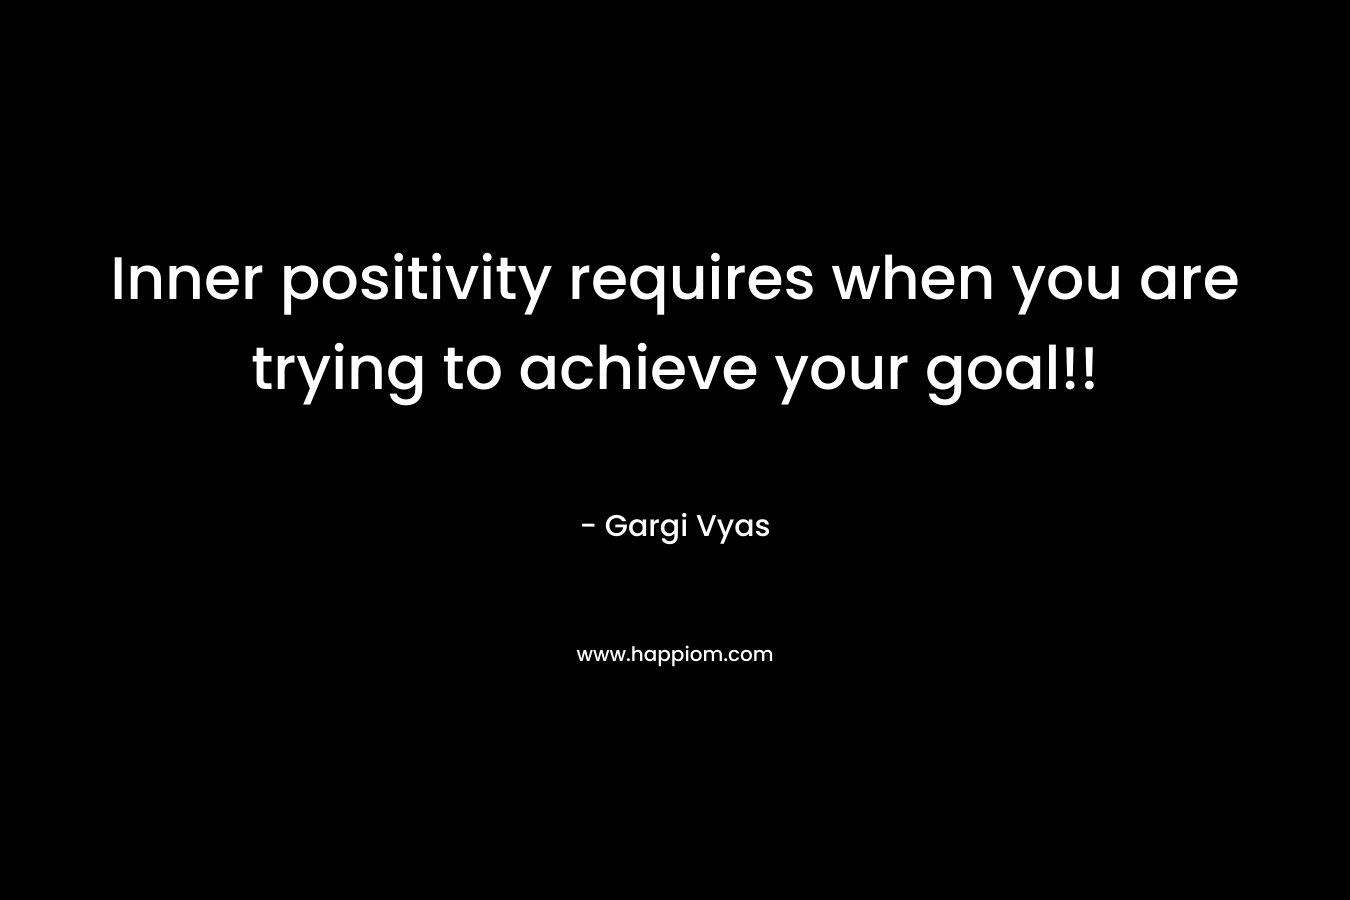 Inner positivity requires when you are trying to achieve your goal!!